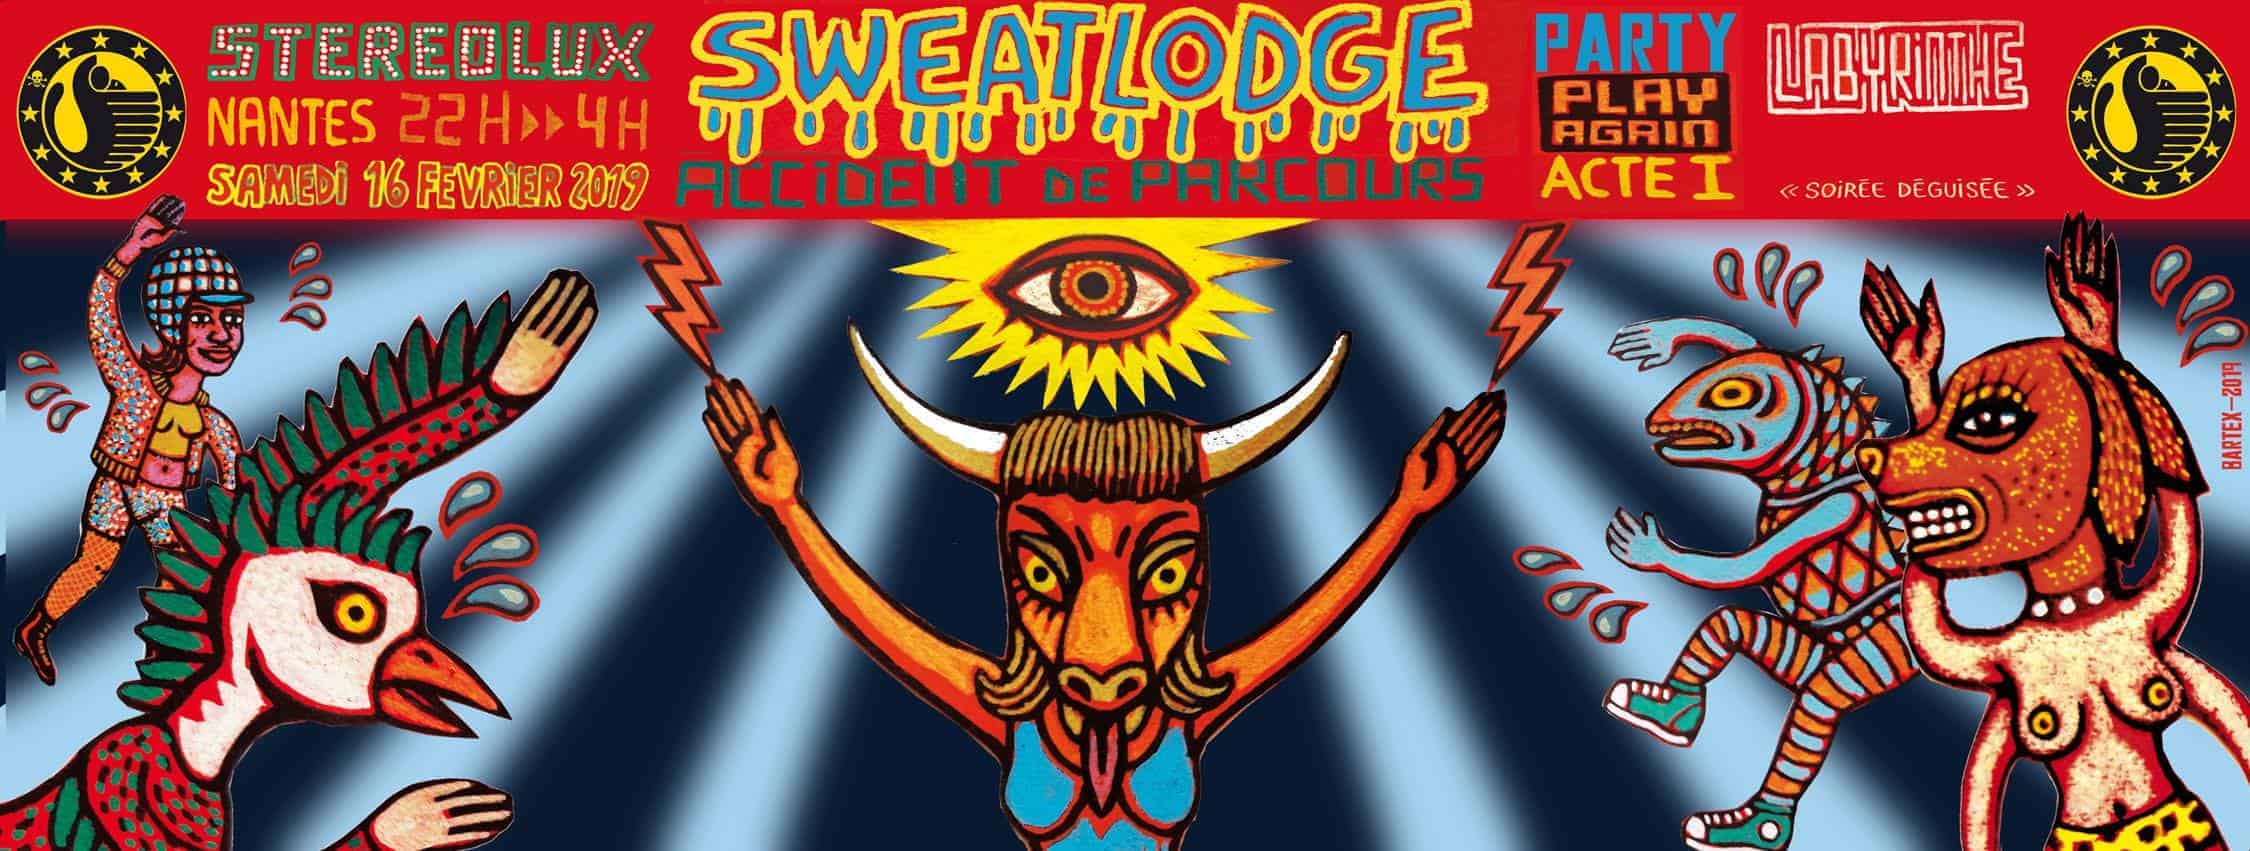 sweatlodge party stereolux